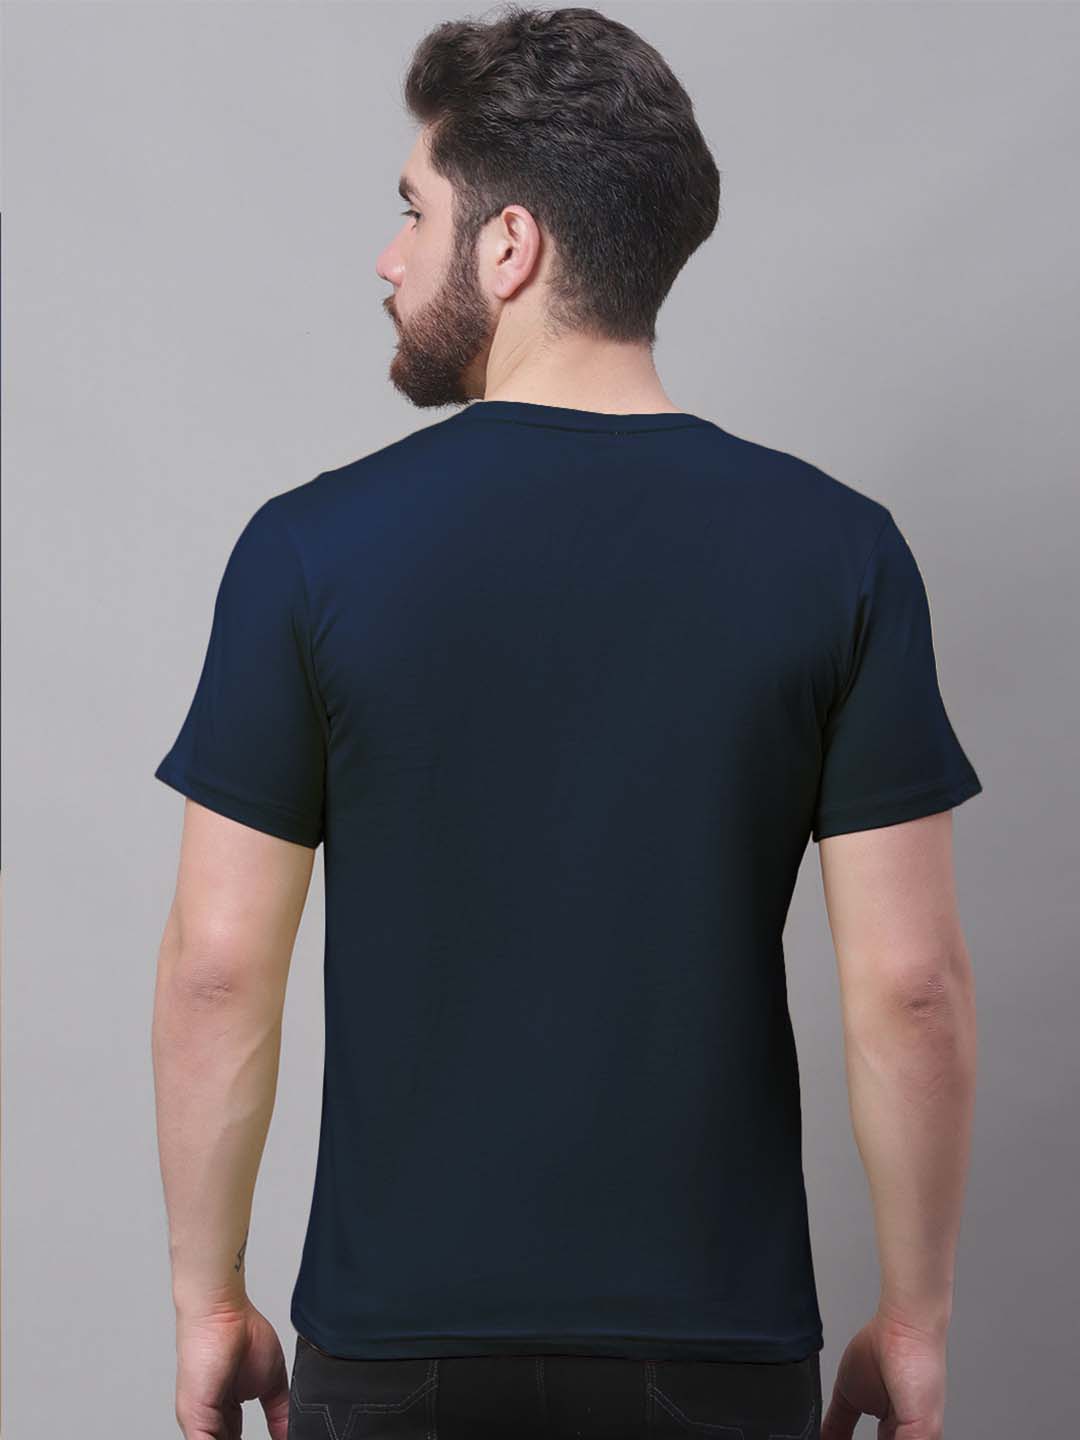 Systumm Printed Round Neck T-shirt - Friskers